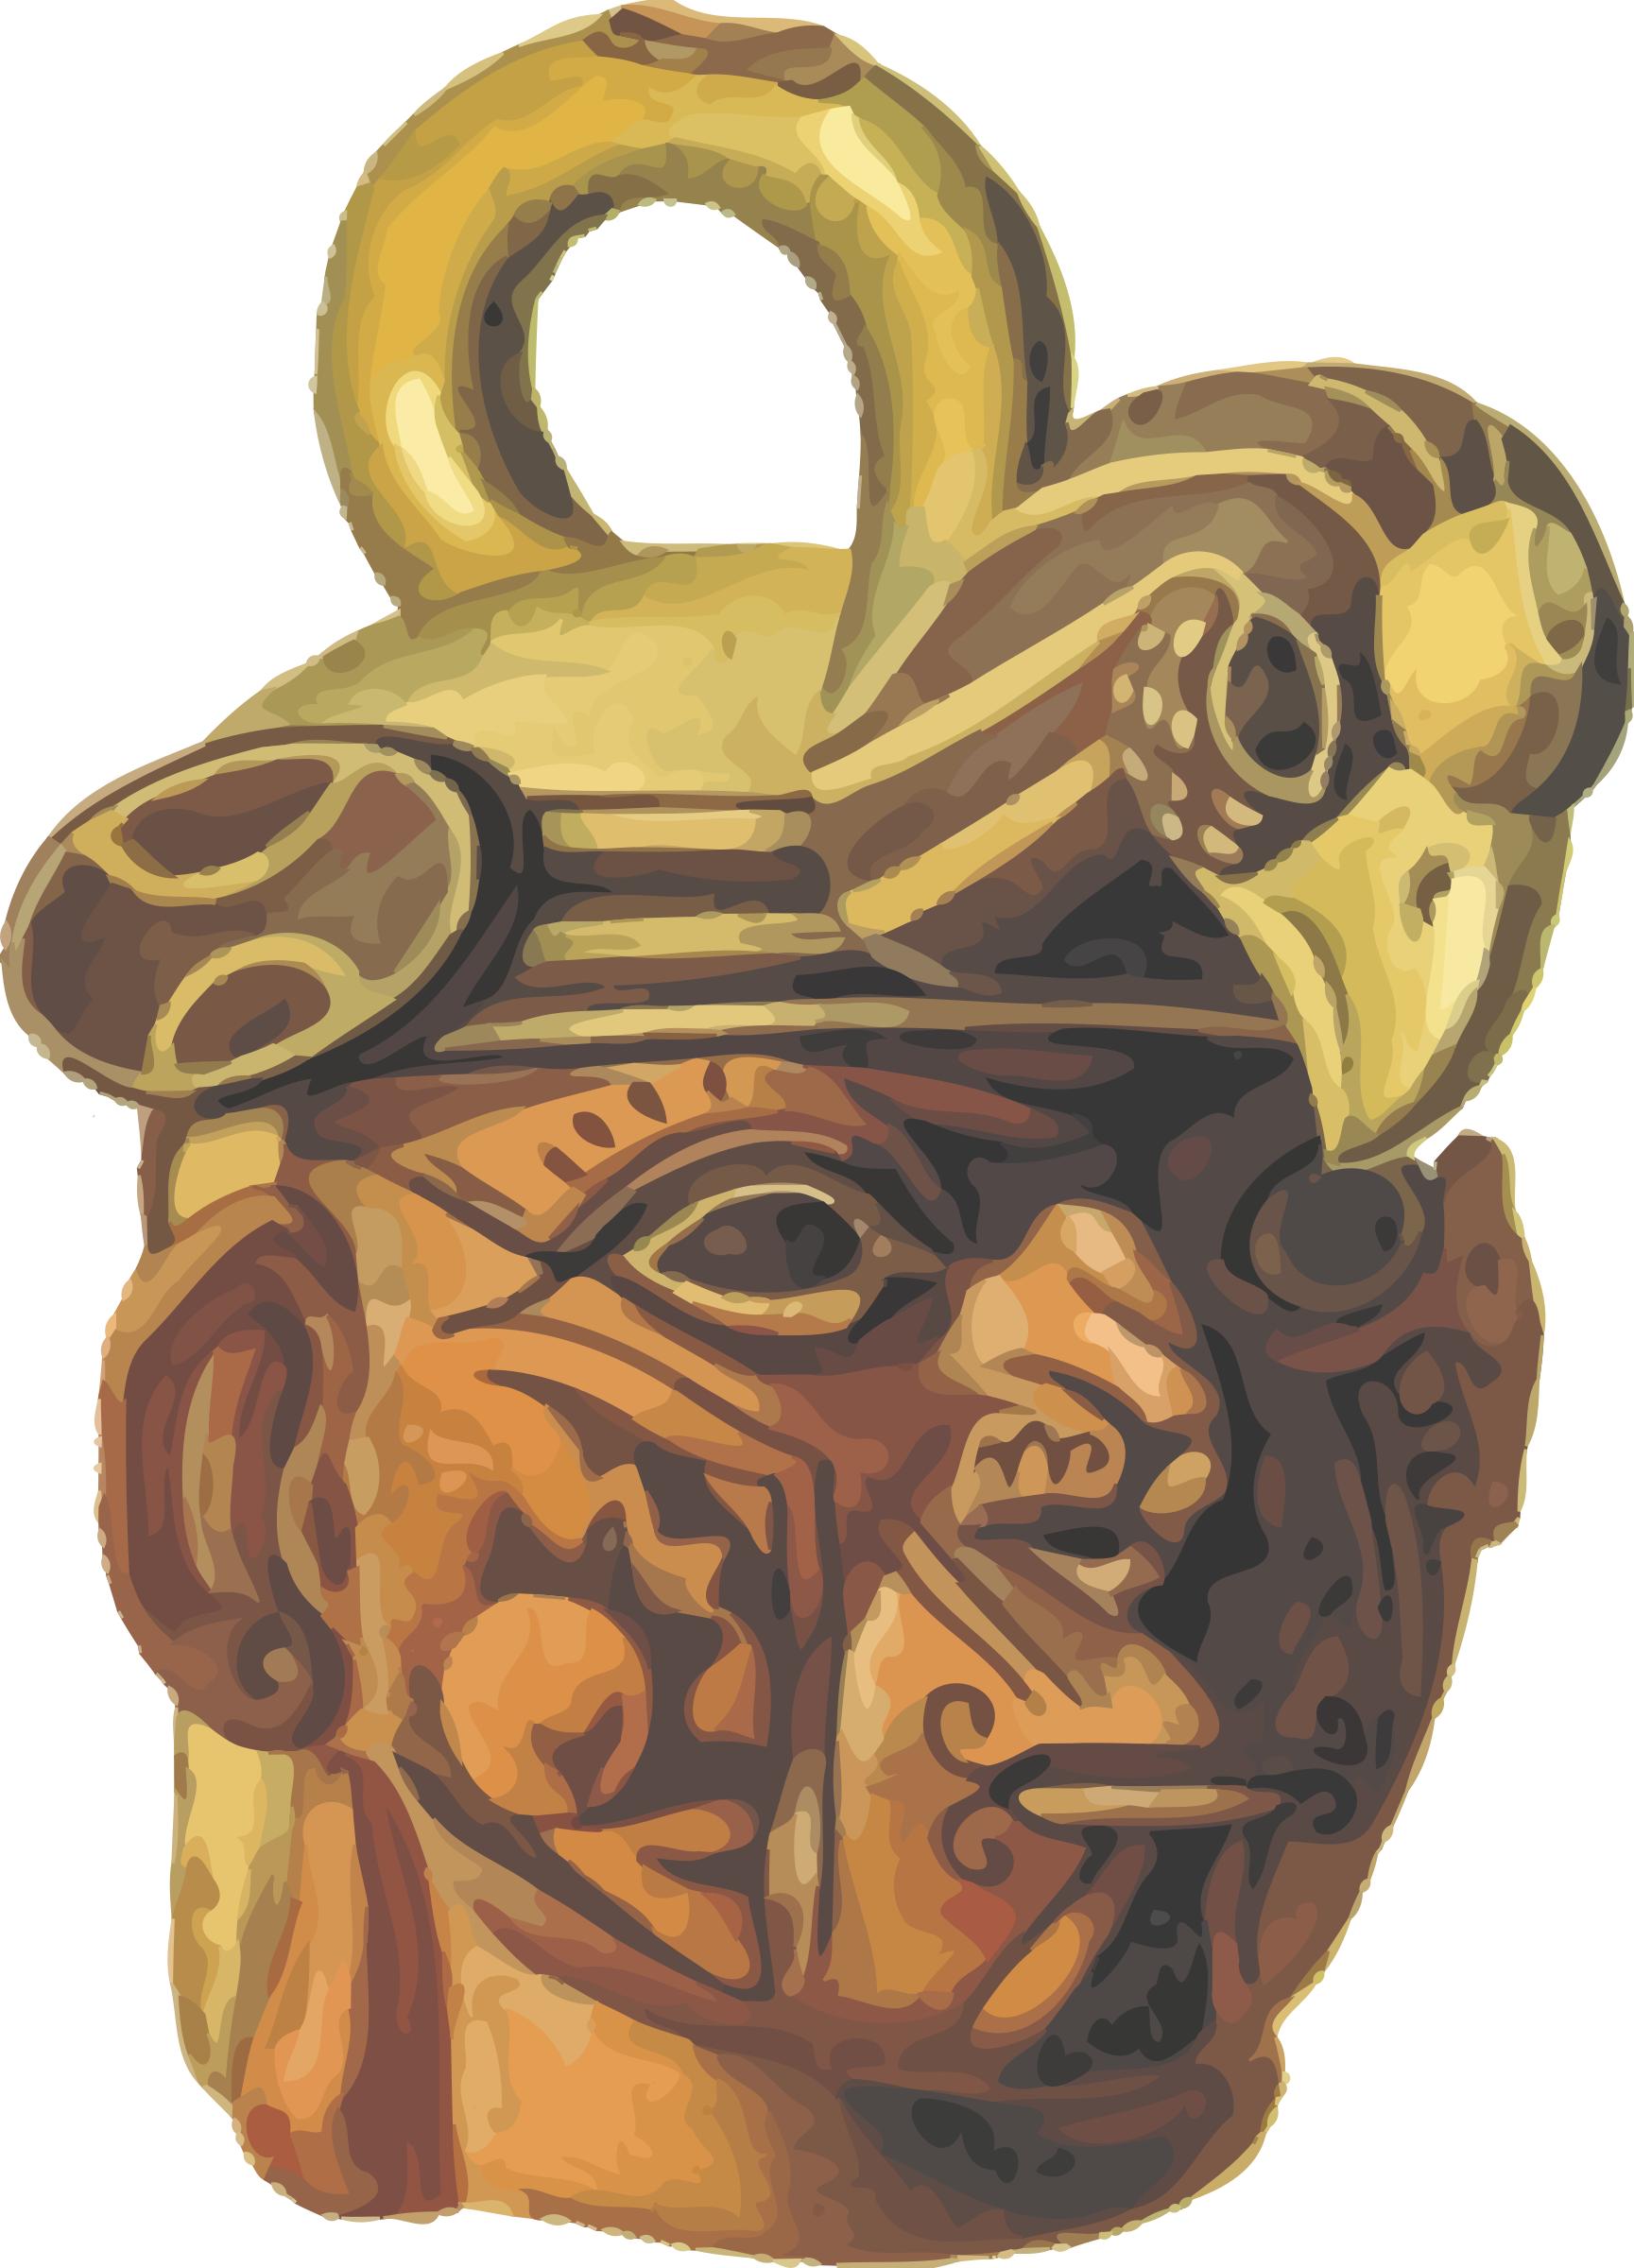 Old American pottery 6 png